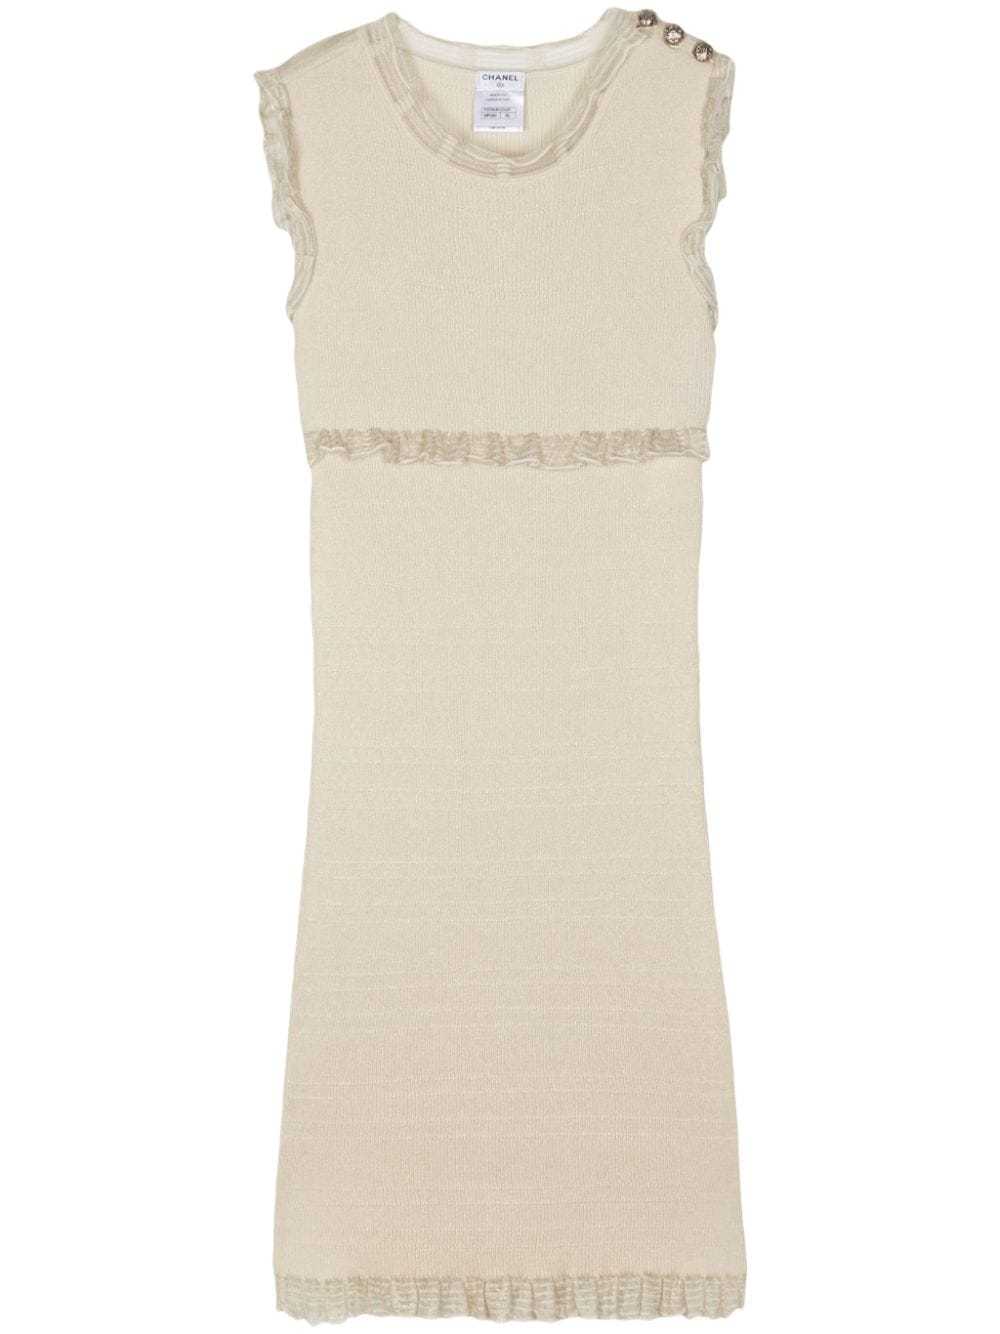 CHANEL Pre-Owned 2000 frill-trimmed cashmere dres… - image 1